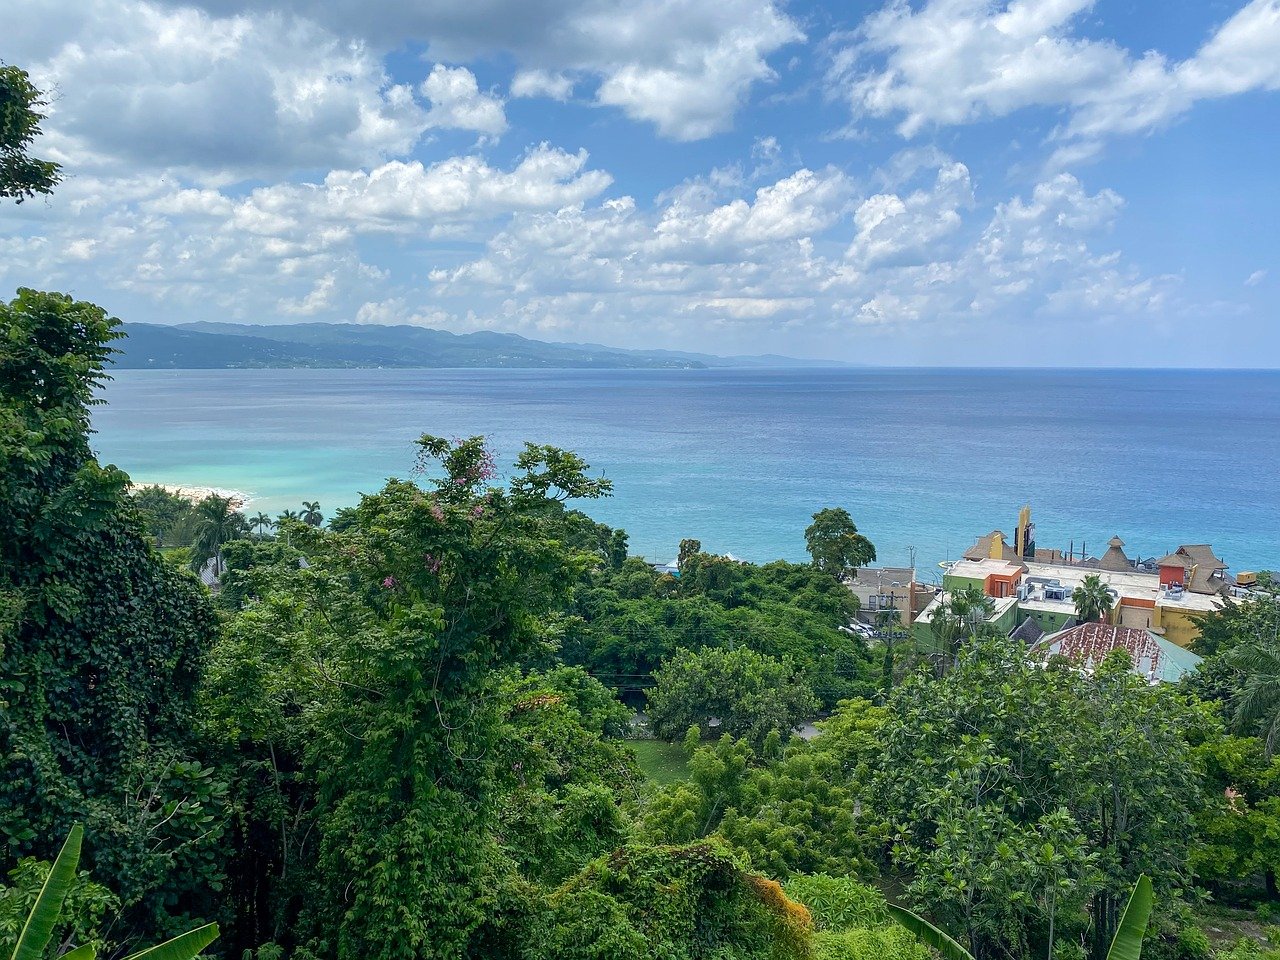 Ultimate Jamaican Adventure: Blue Mountains to White Sands